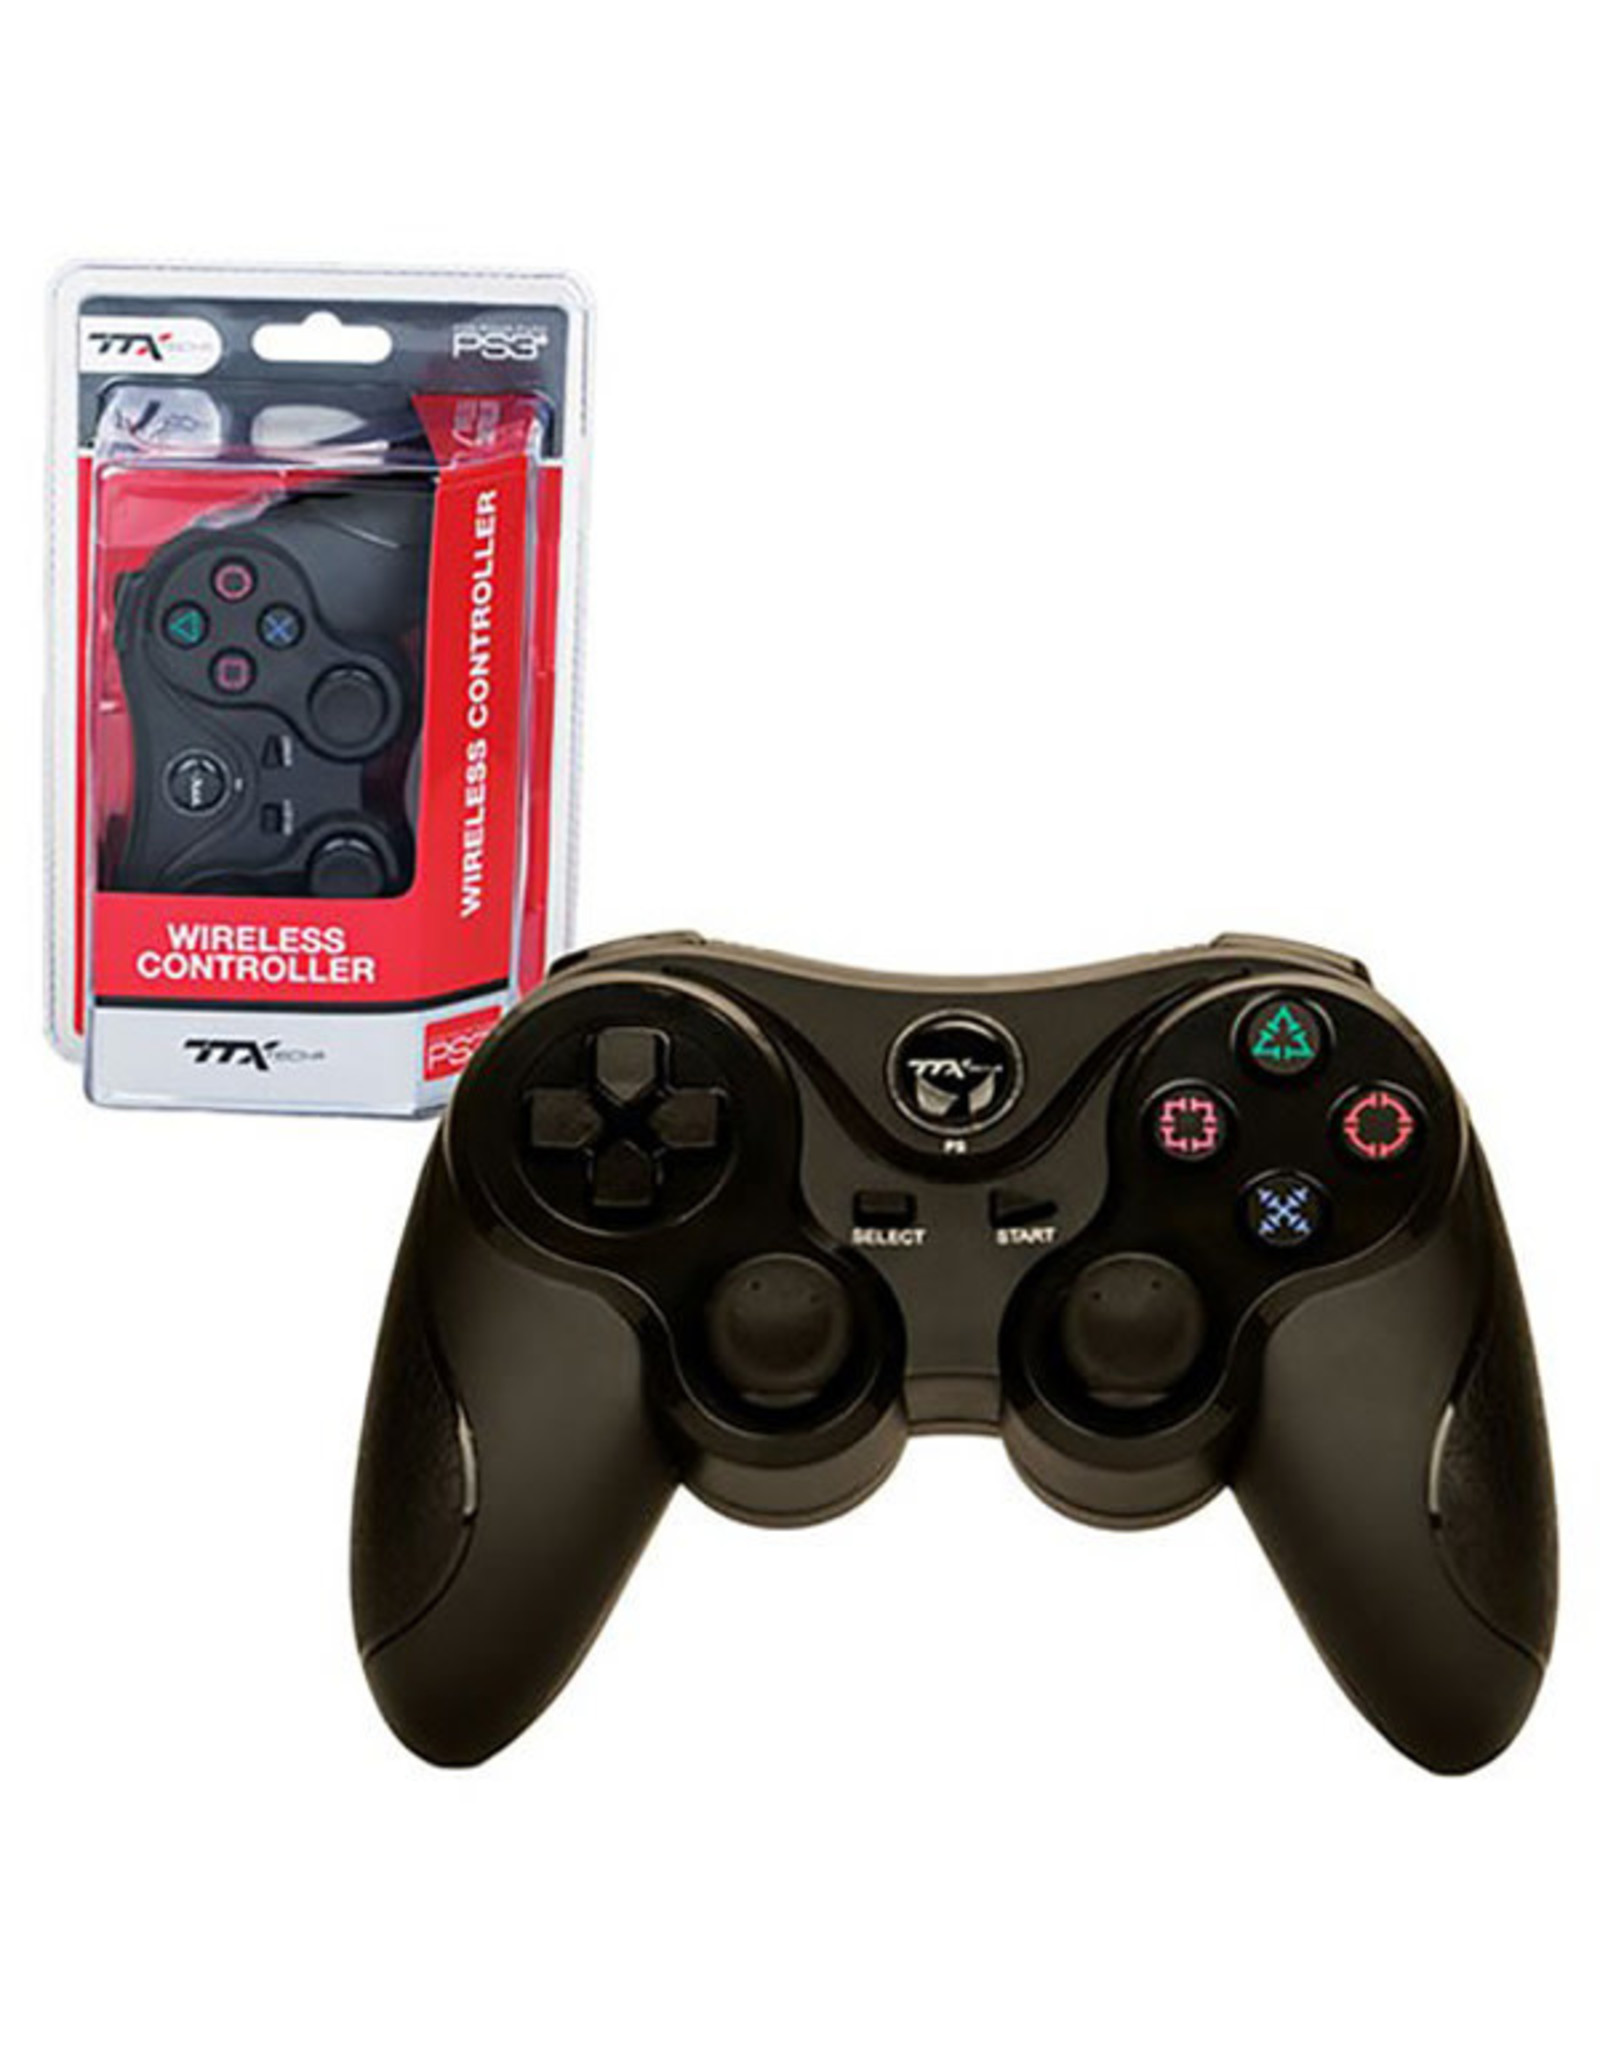 Playstation 3 PS3 Playstation 3 Wireless Controller Black (TTX)